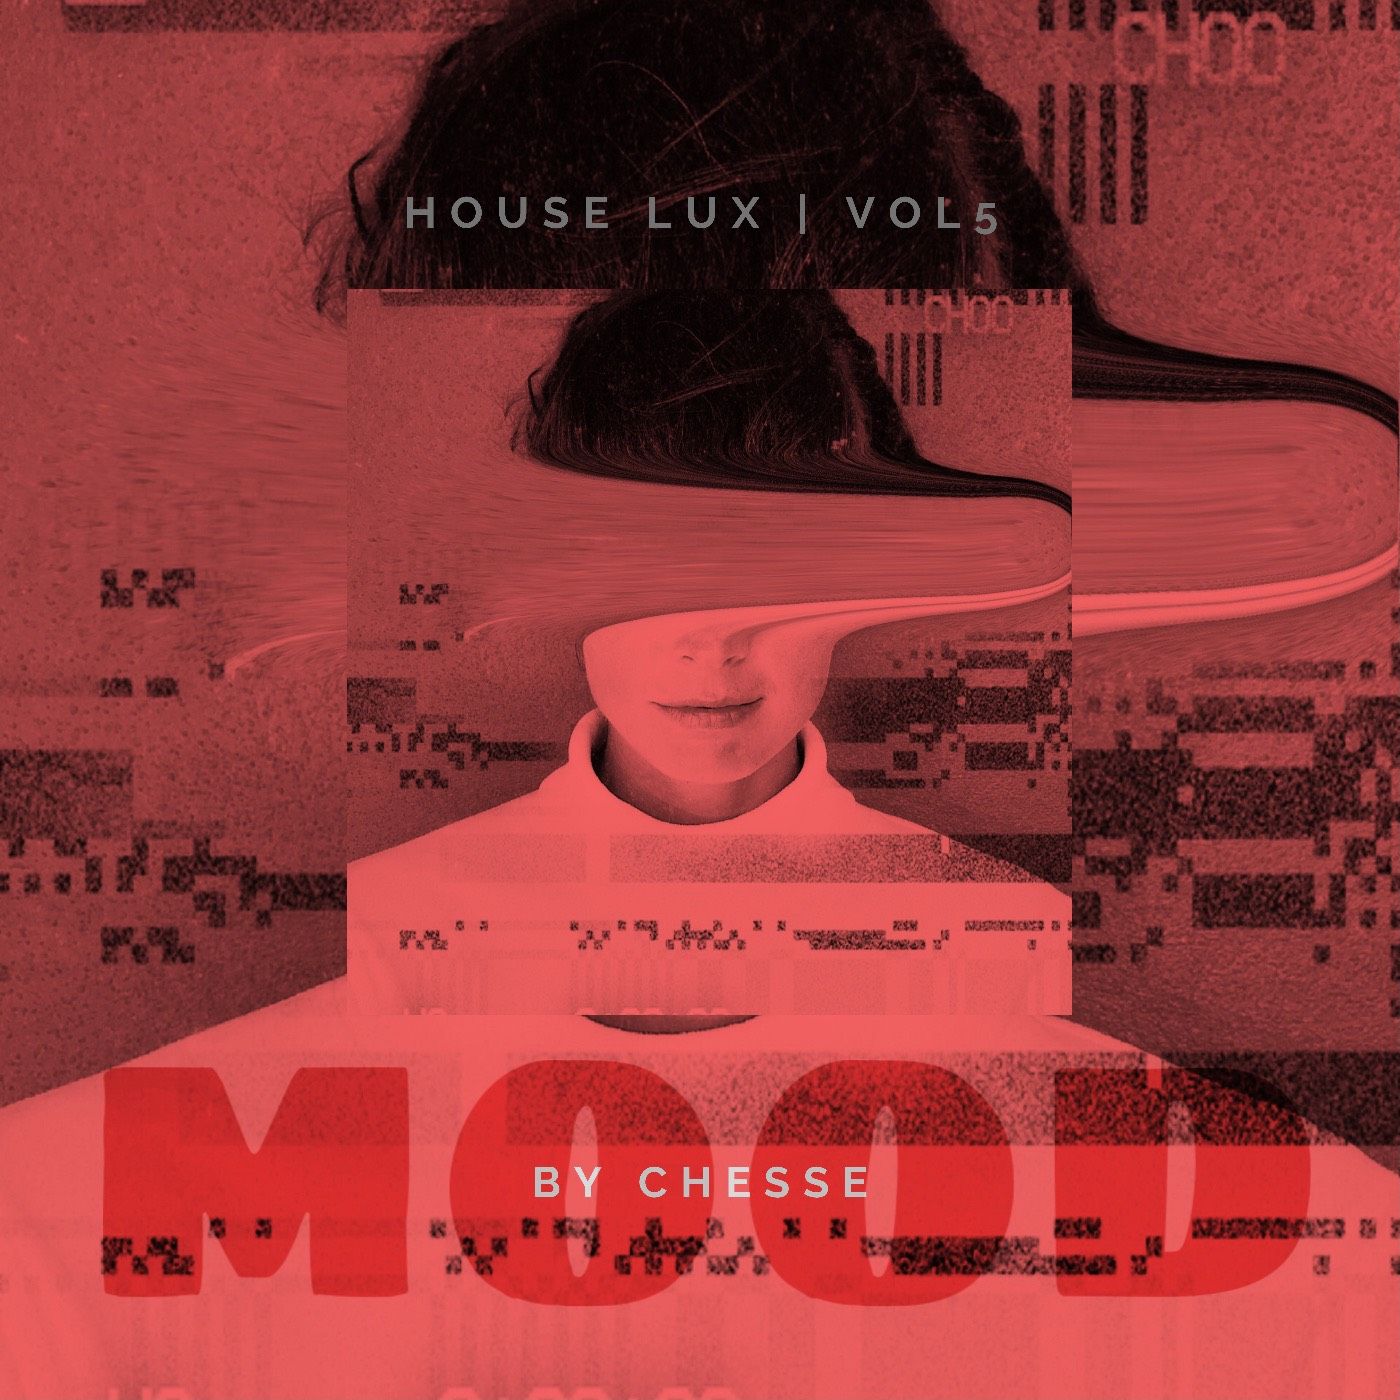 Descargar MOOD - By Chesse - House lux #005